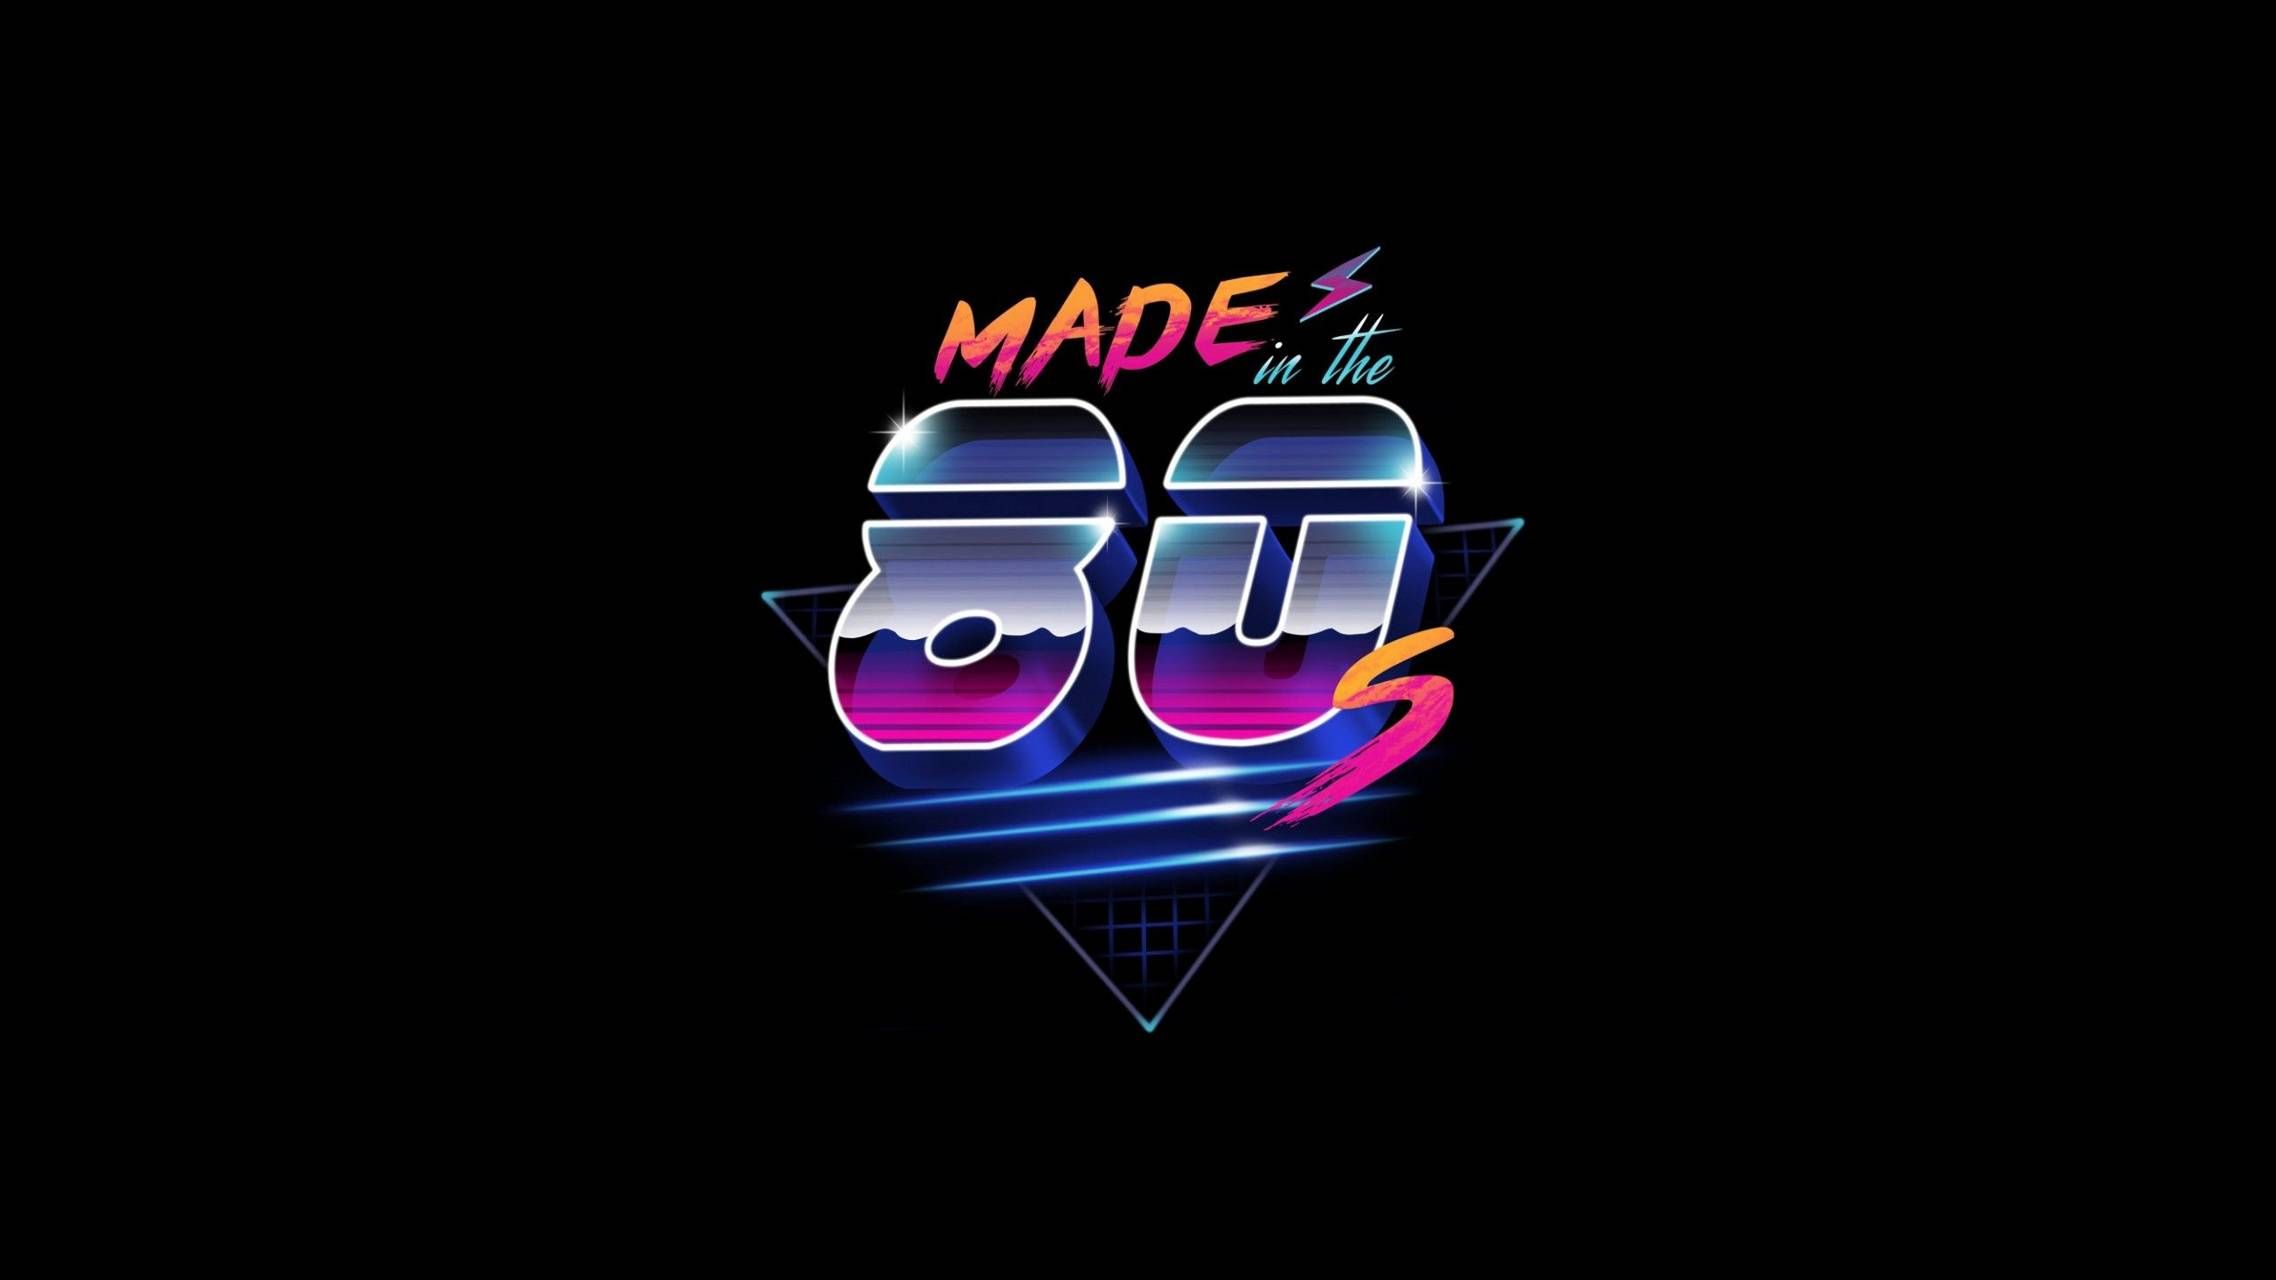 Made in the 80s wallpaper by Macvenzer .zedge.net